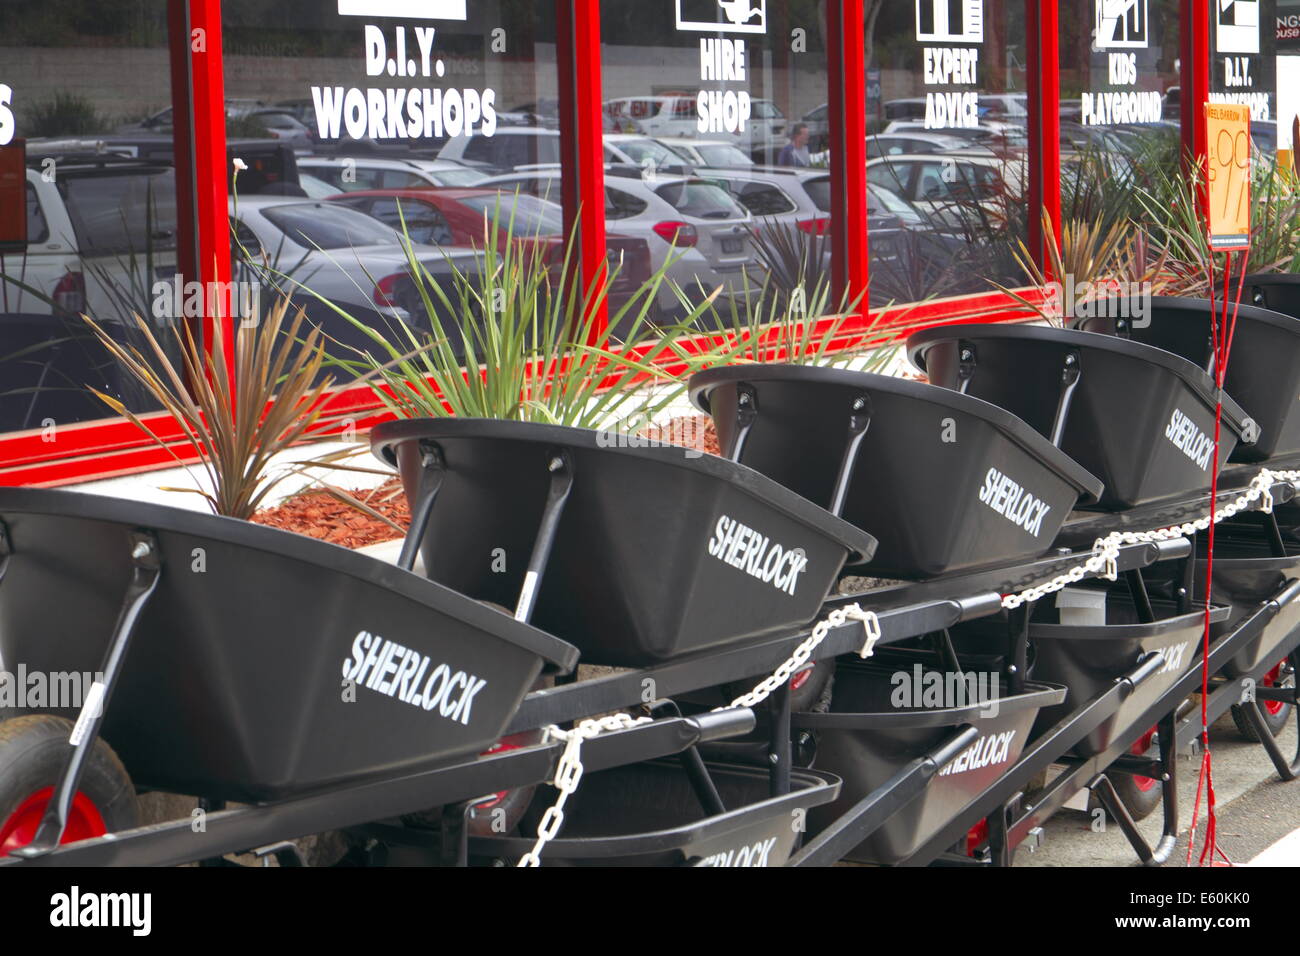 Bunnings is a national DIY retailer owned by wesfarmers, it sells tools, timber, wheelbarrows,equipment for builders and home owners, Sydney,Australia Stock Photo